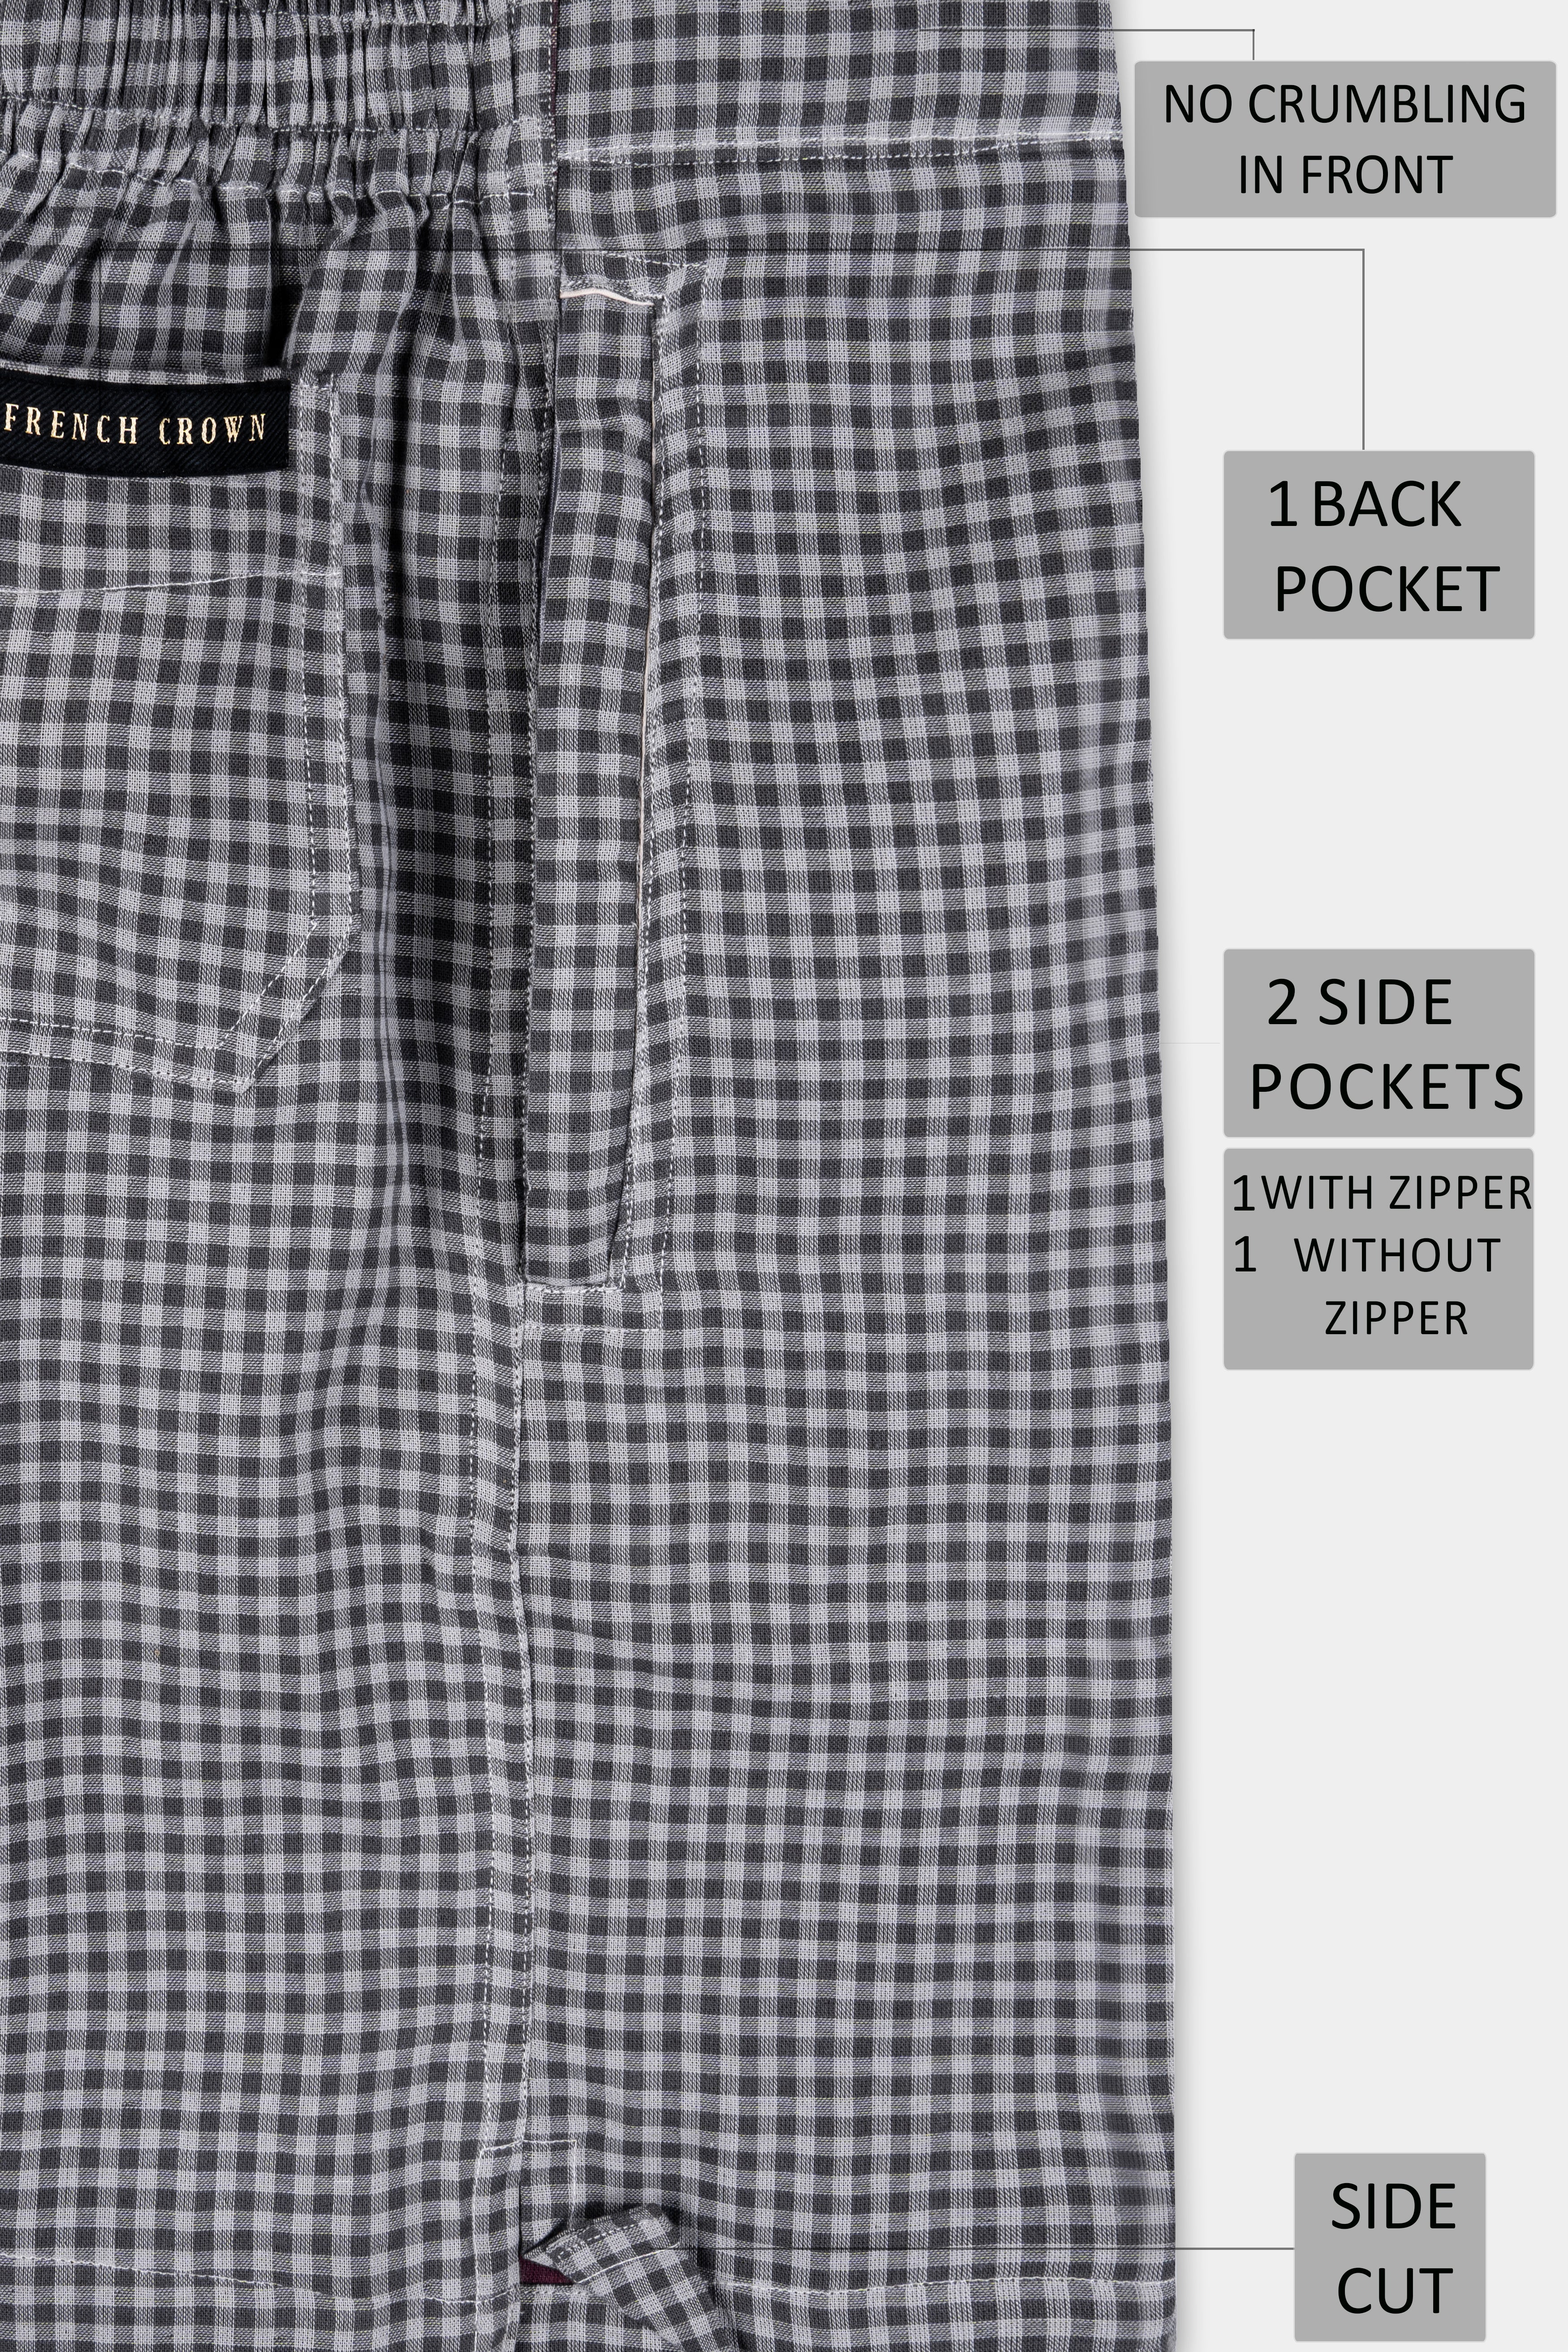 Abbey and Oslo Gray Gingham Checkered Twill Premium Cotton Shorts SR380-28, SR380-30, SR380-32, SR380-34, SR380-36, SR380-38, SR380-40, SR380-42, SR380-44